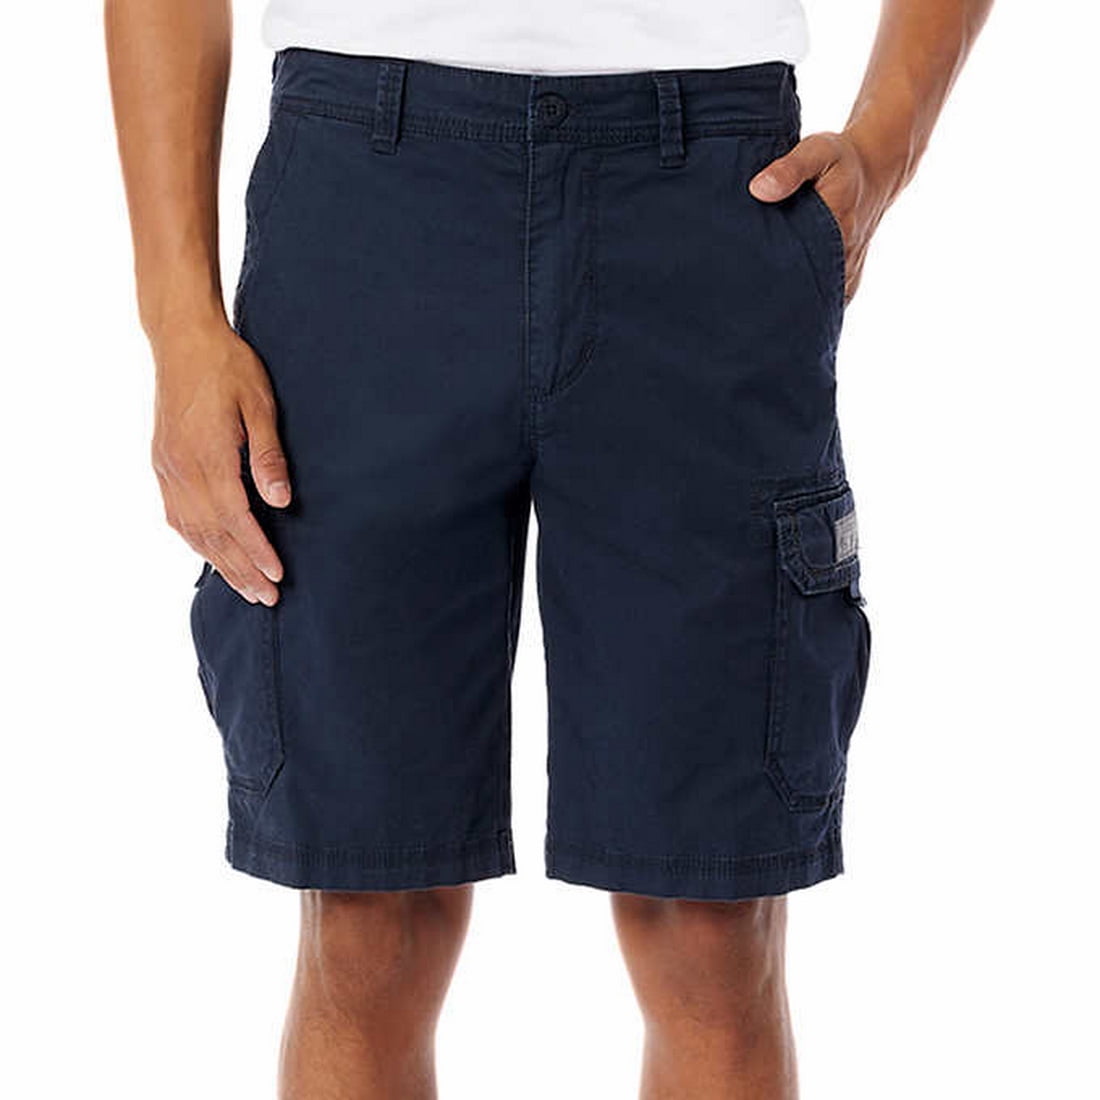 Comfort Stretch UNIONBAY Montego Cargo Shorts for Men Assorted Colors and Sizes 